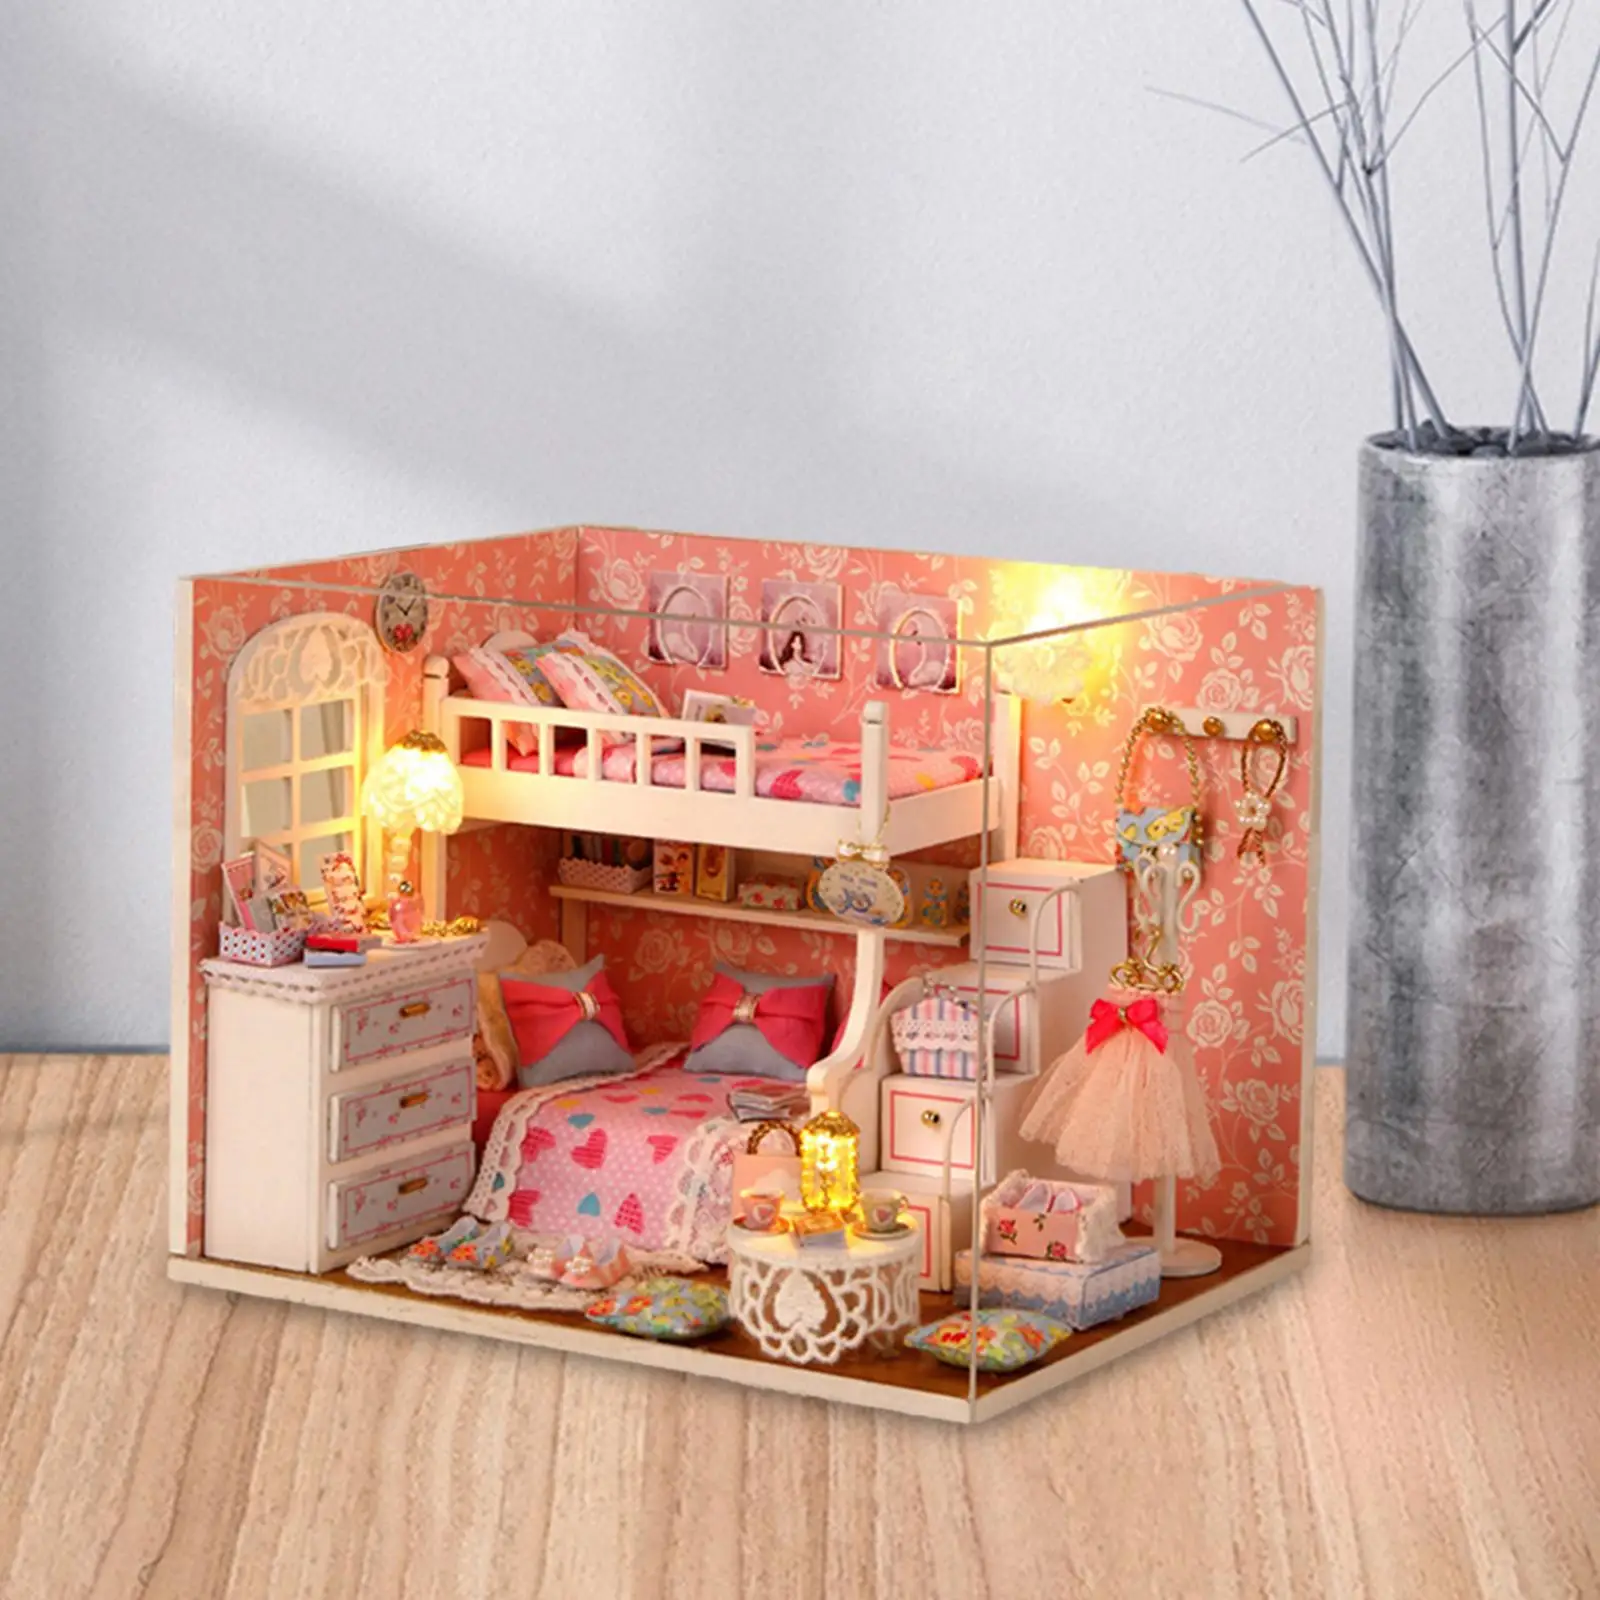 DIY Wooden Miniature Dollhouse Kits for Women Girls Handmade with Furniture and Ornaments Modern Birthday Gifts Creative Bedroom